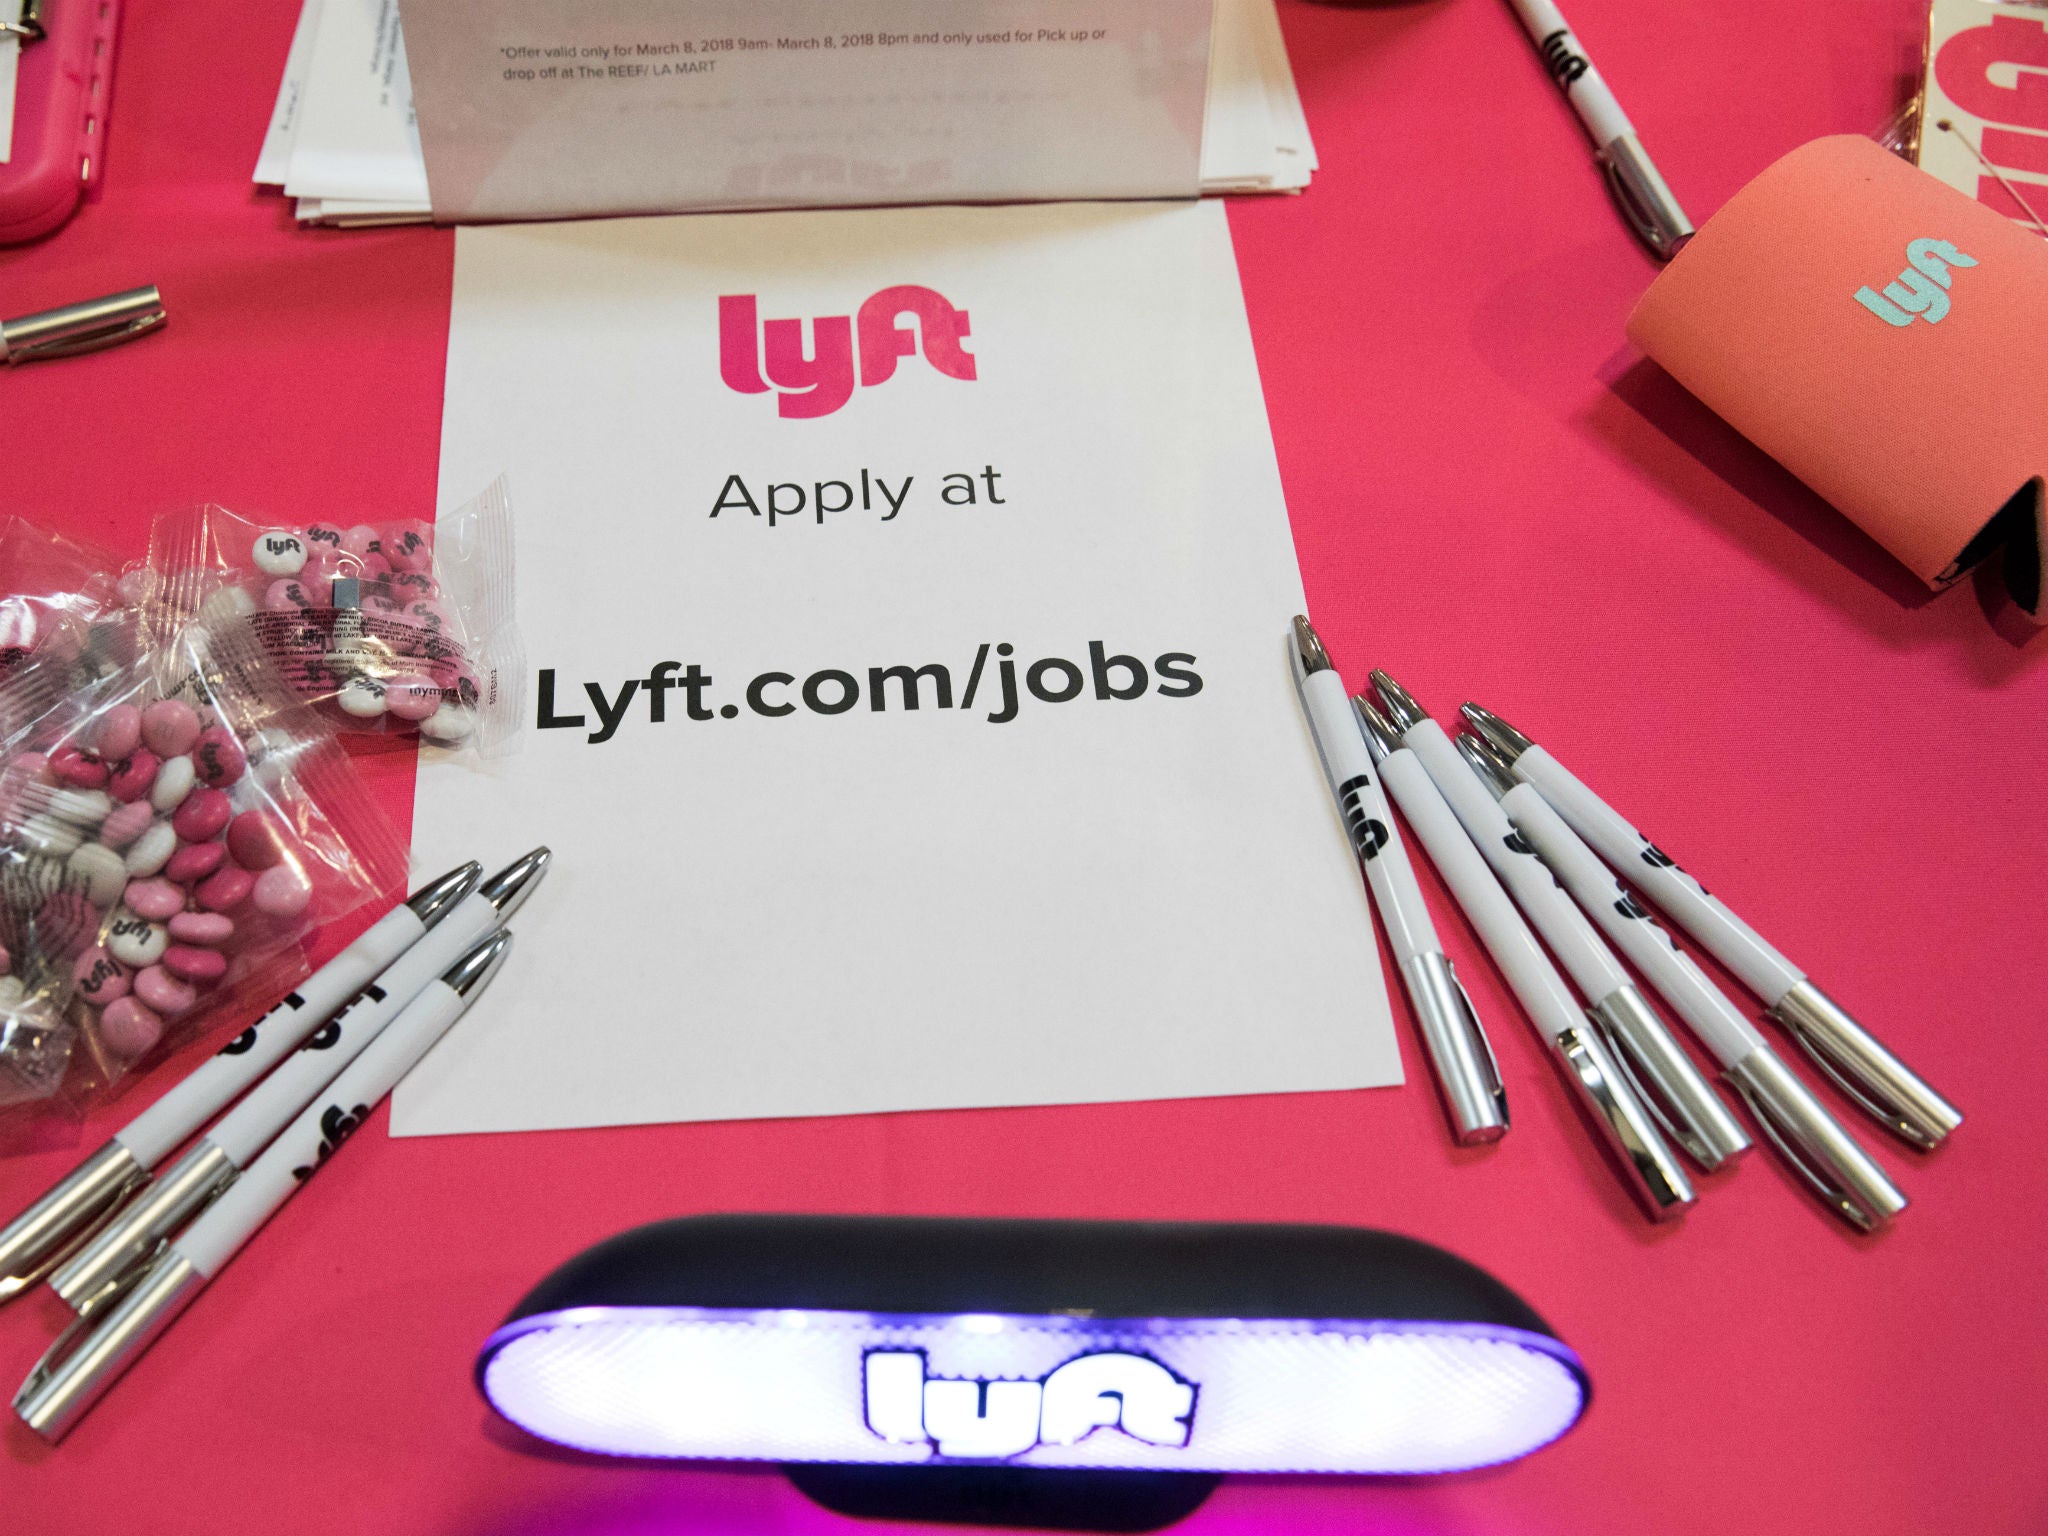 The Lyft booth is seen at job fair in Los Angeles, California